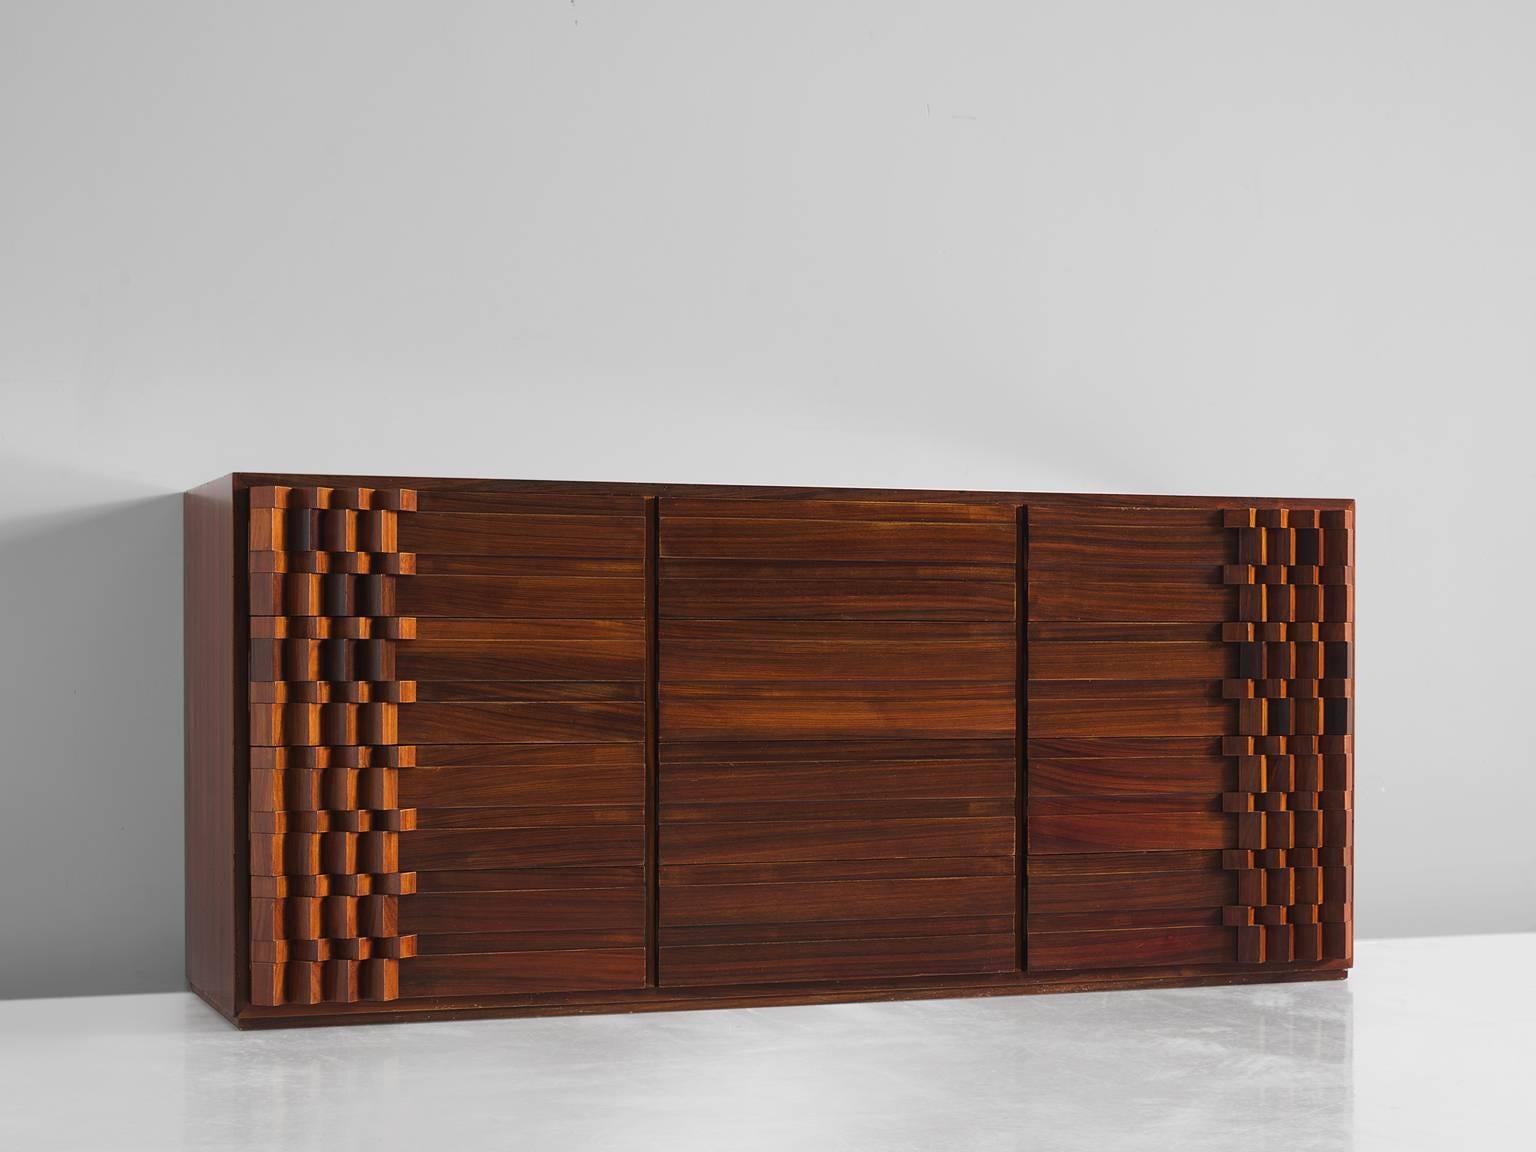 Luciano Frigerio cabinet rosewood, Italy, 1970s.

This Postmodern credenza is designed with a complex 3D pattern of squares that create a wonderful play of shadow and light on each corner of the sideboard. The 'blocks' create a strong graphic and